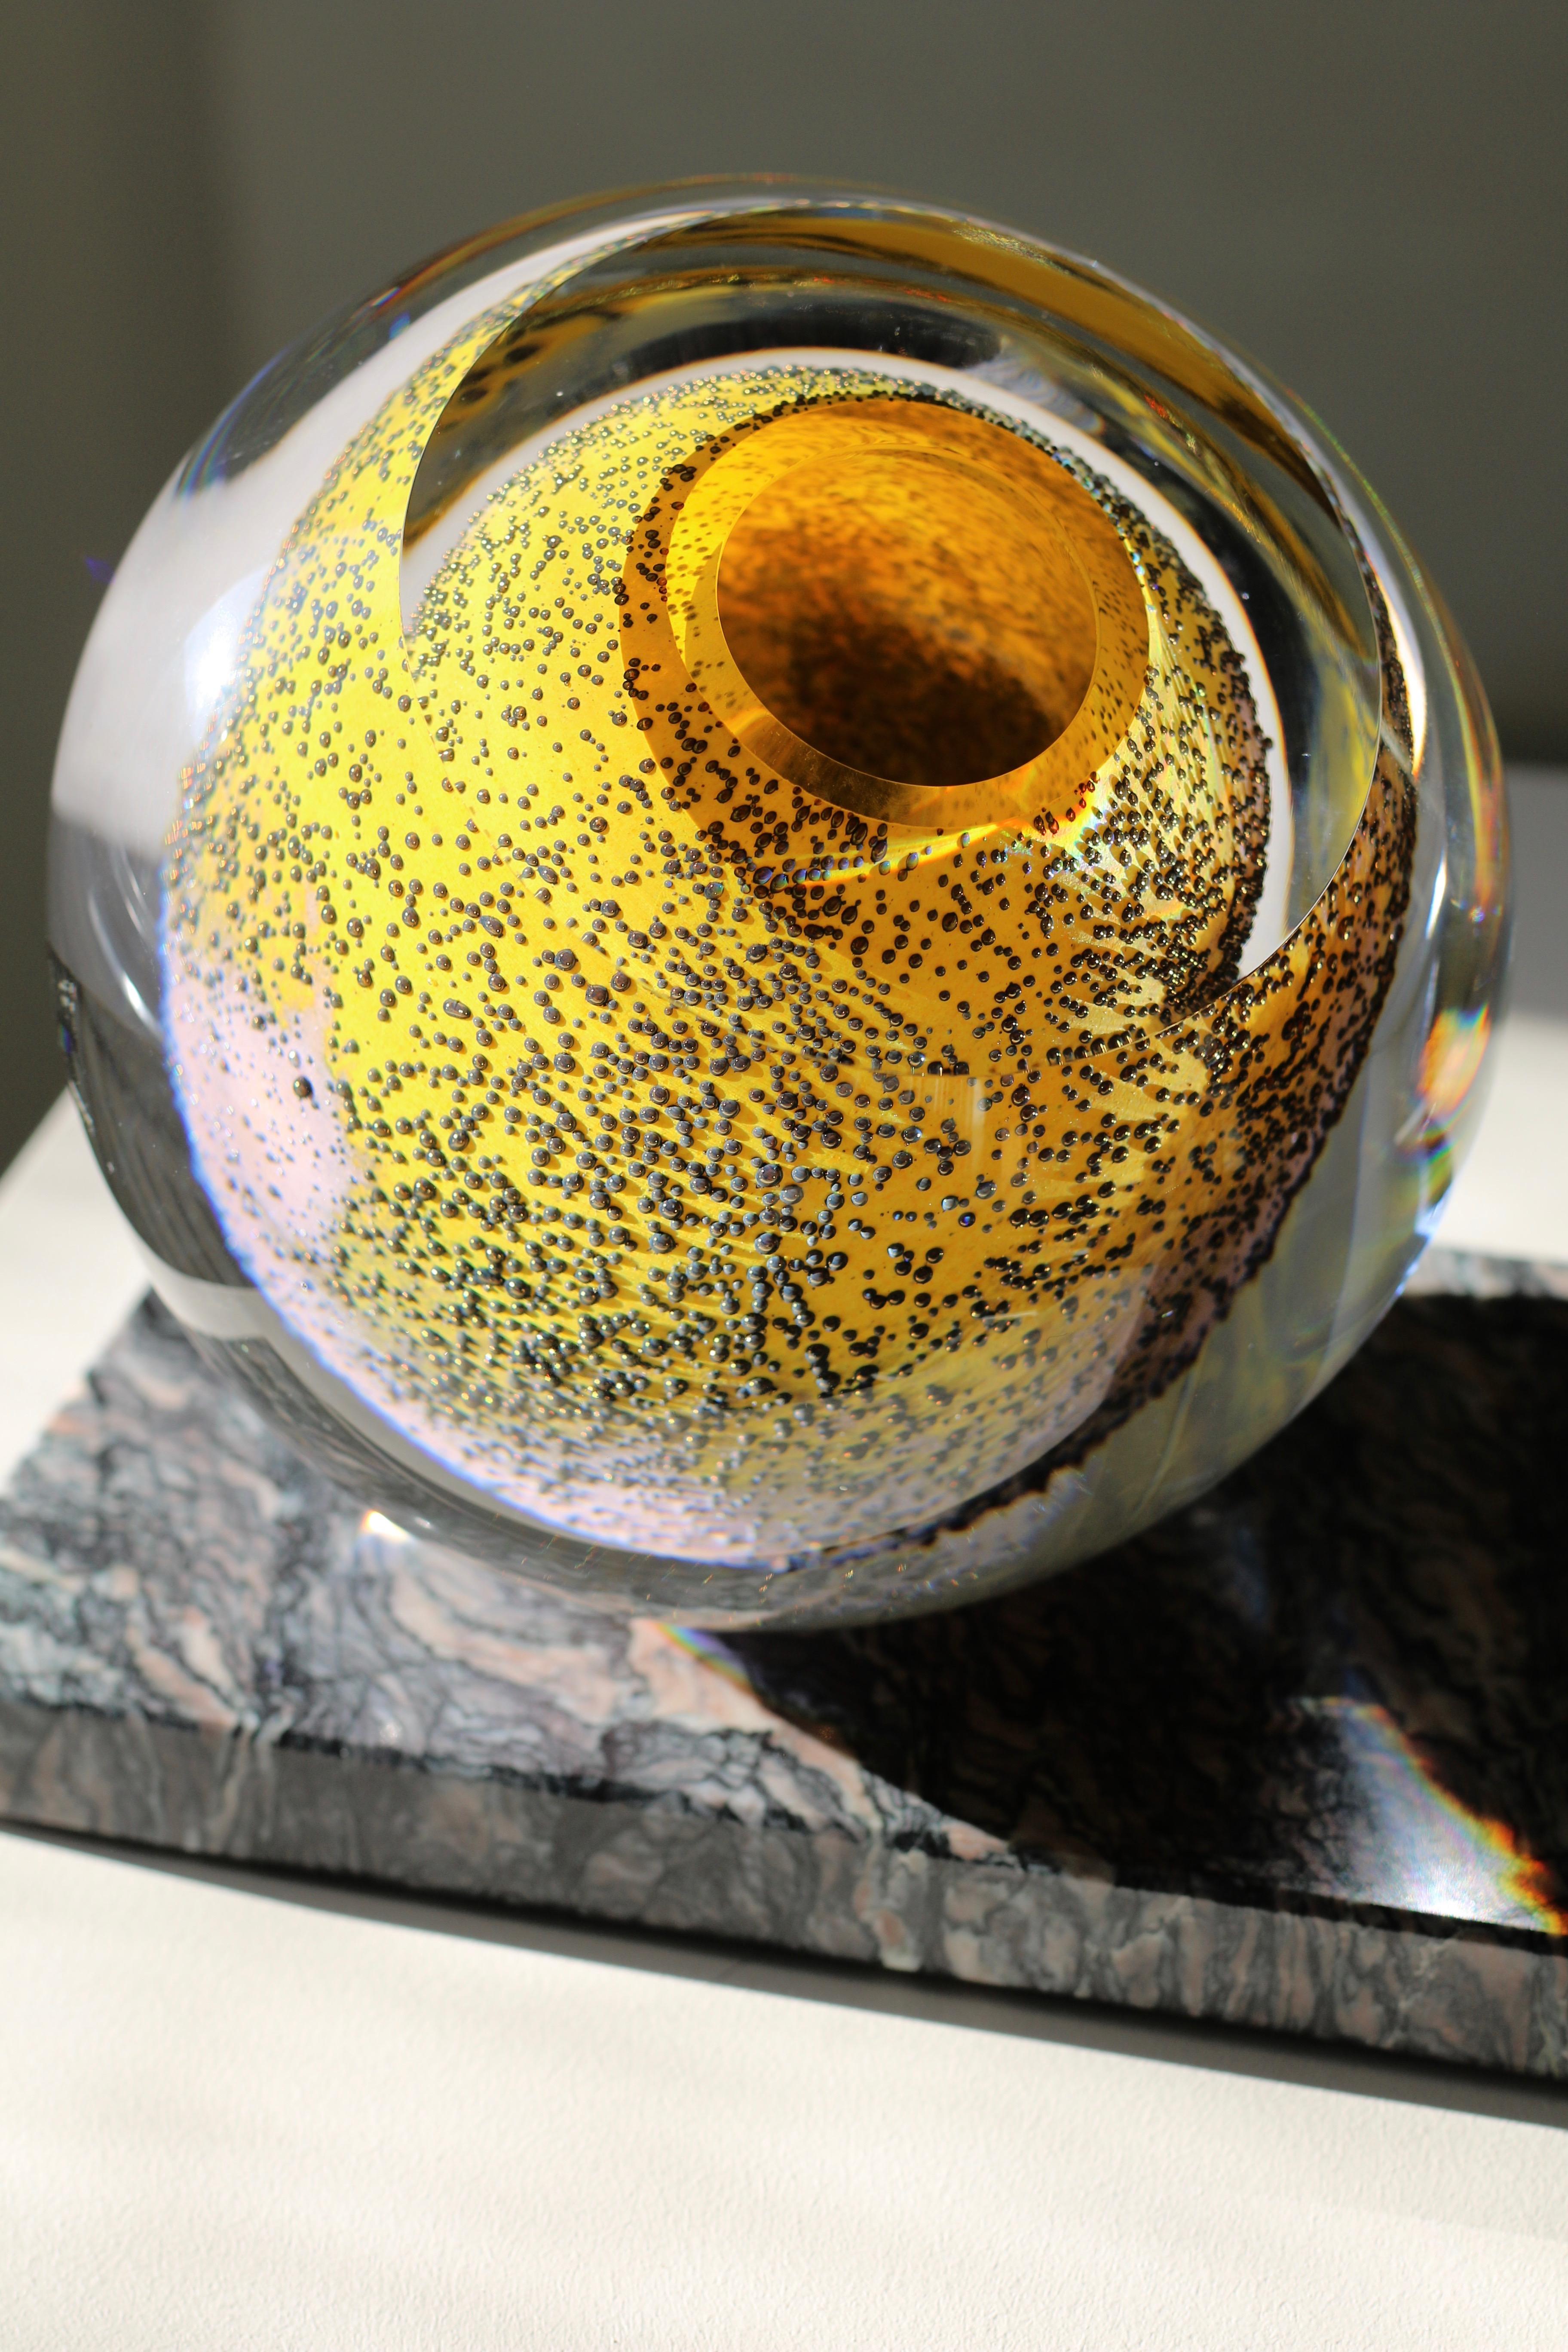 'Spring Poetry' large sculptural vase in mouth blown glass in bright yellow, plum and dawn pink. 
Cipollino Ondulato marble
Handcrafted in top quality, extra clear glass
Unique item, signed

For striking flower arrangements large glass sphere